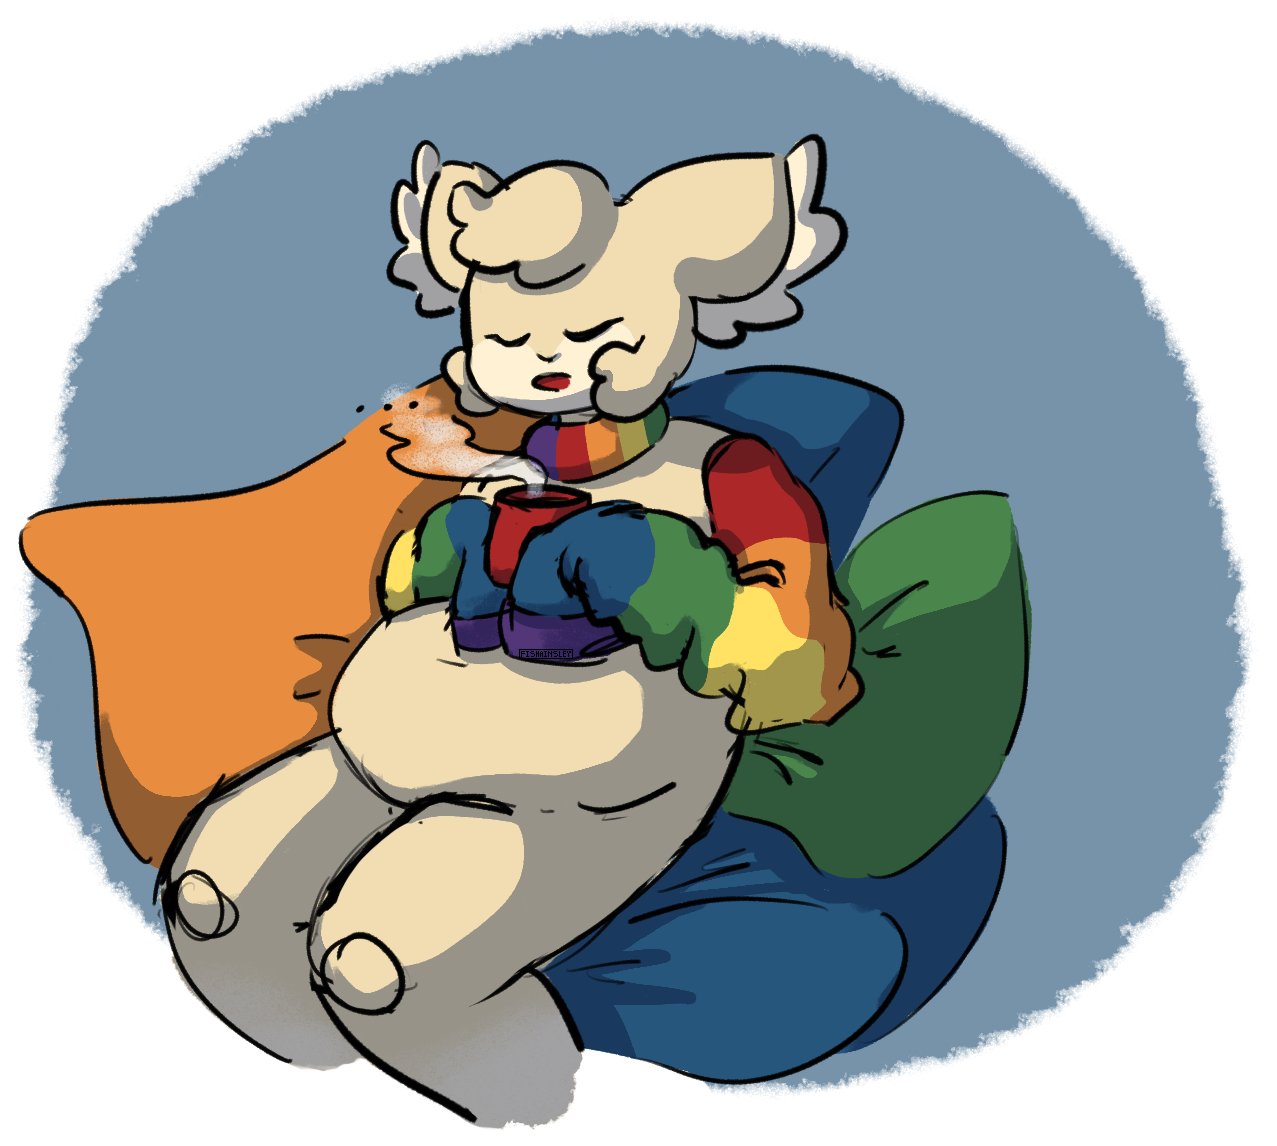 A thimblet (anthro stuffed animal with rainbow sweater arms) holding a cup of hot cocoa while sitting down